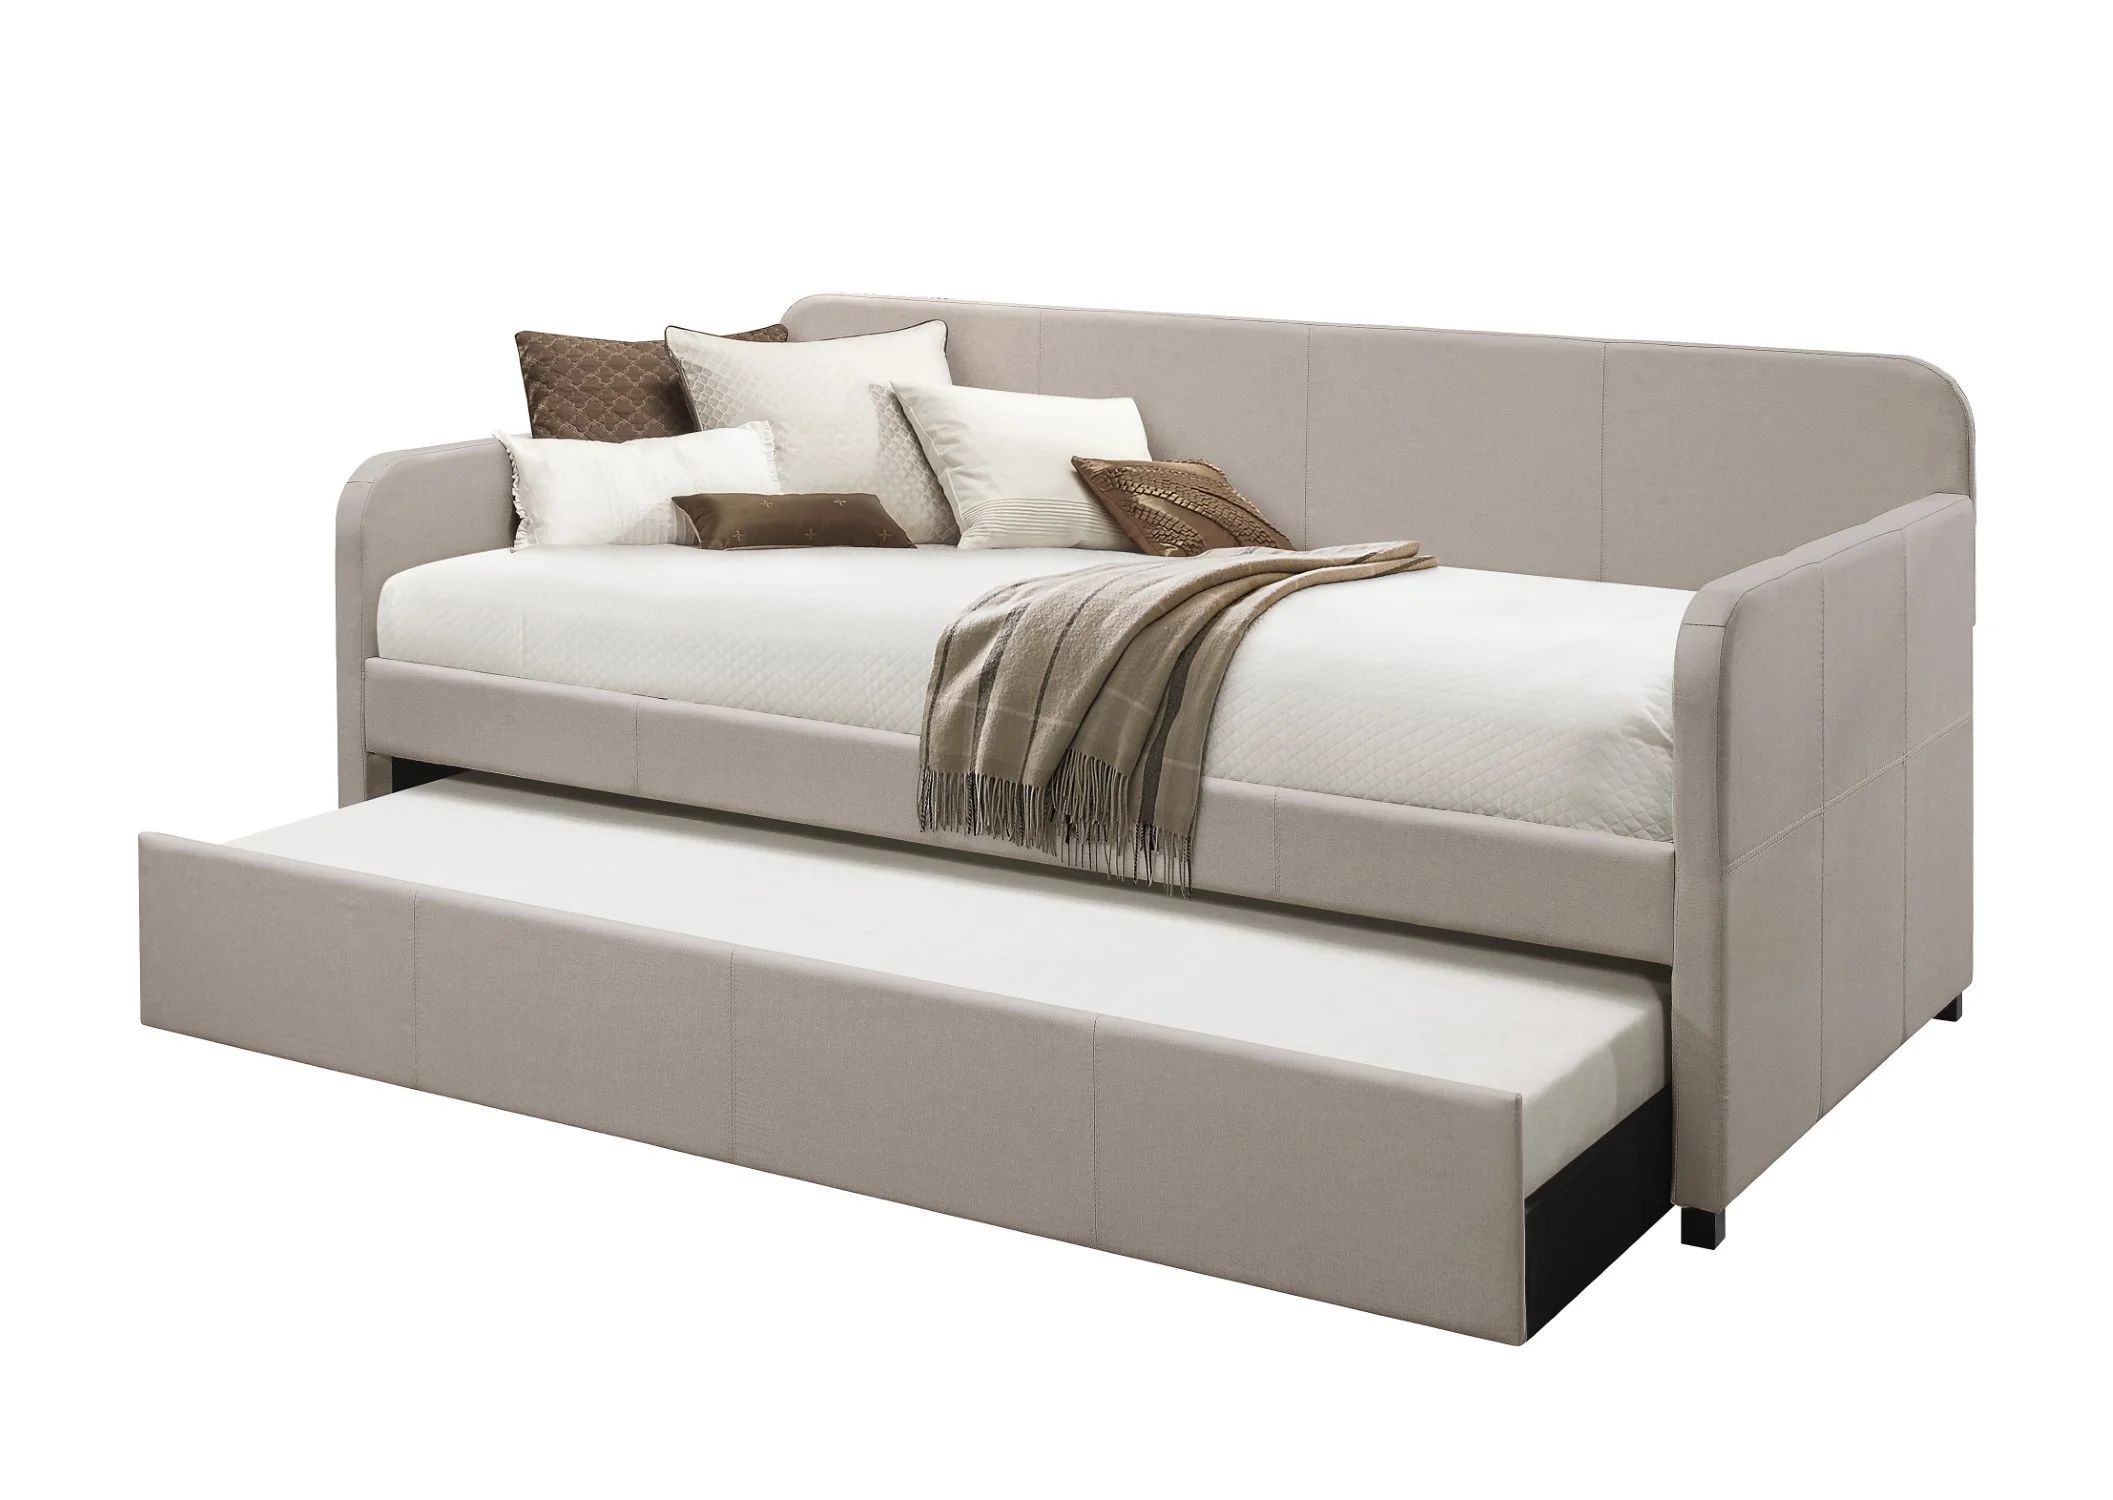 Ruggiero Upholstered Daybed with Trundle | Wayfair North America